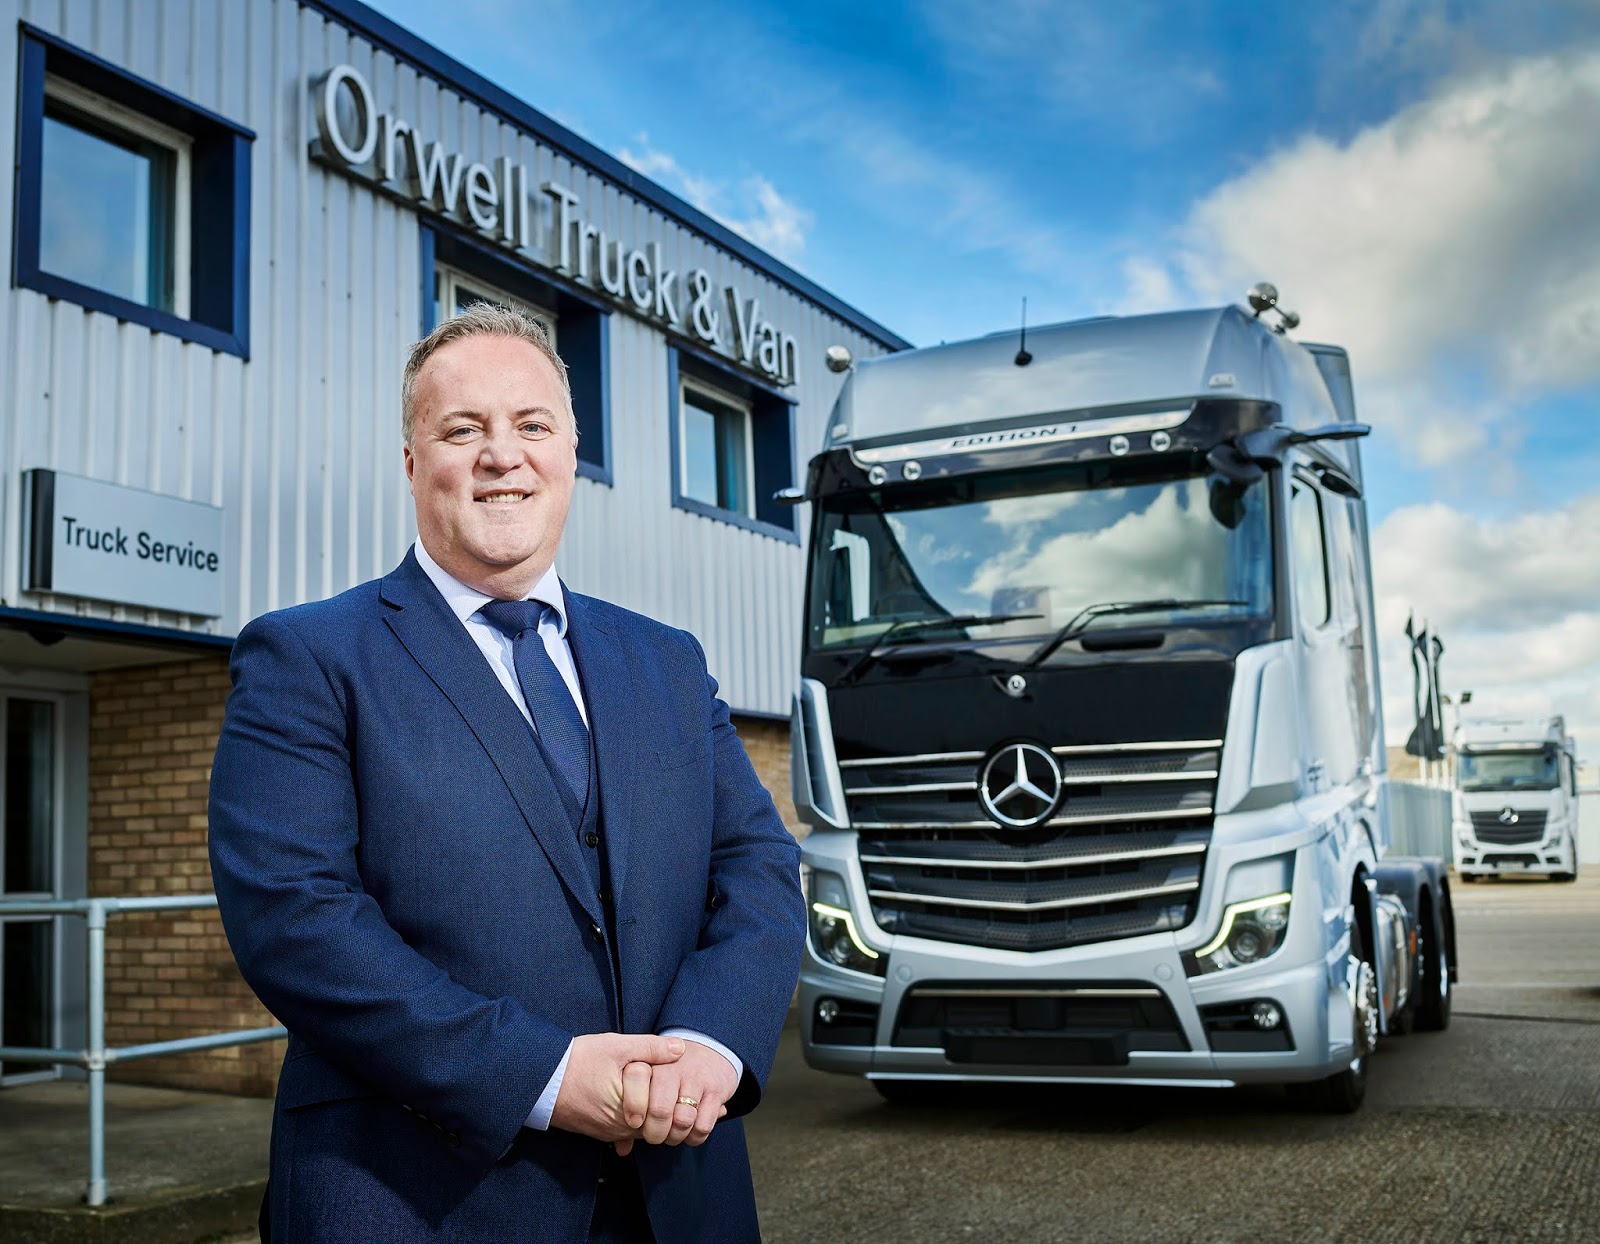 Customer care is key for MercedesBenz Dealers Orwell and